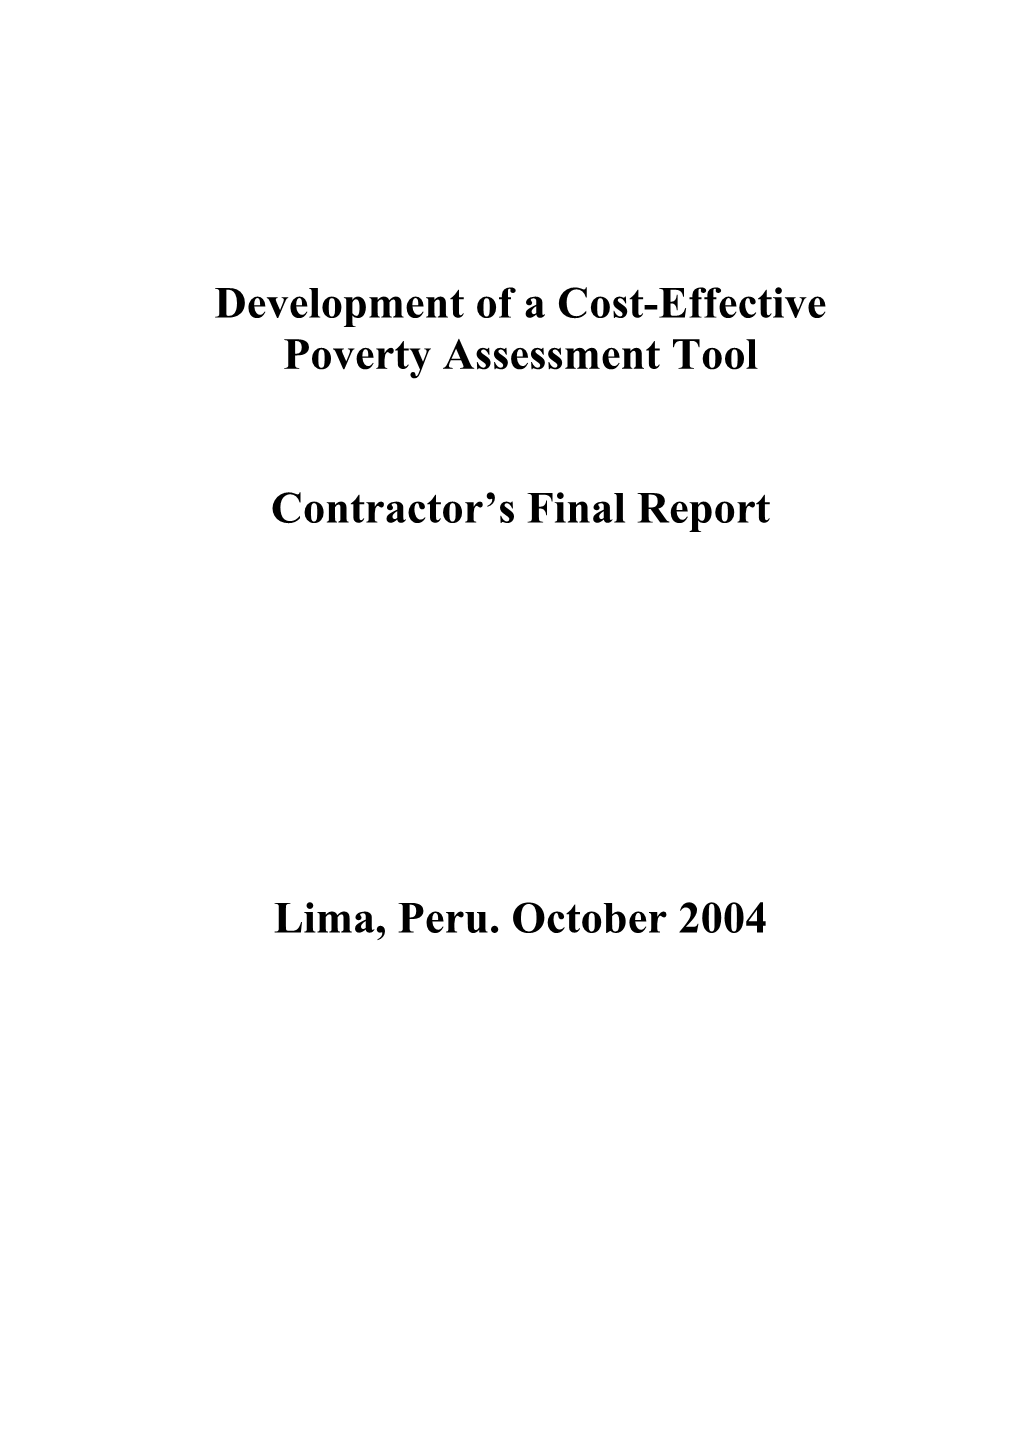 Development of a Cost-Effective Poverty Assessment Tool